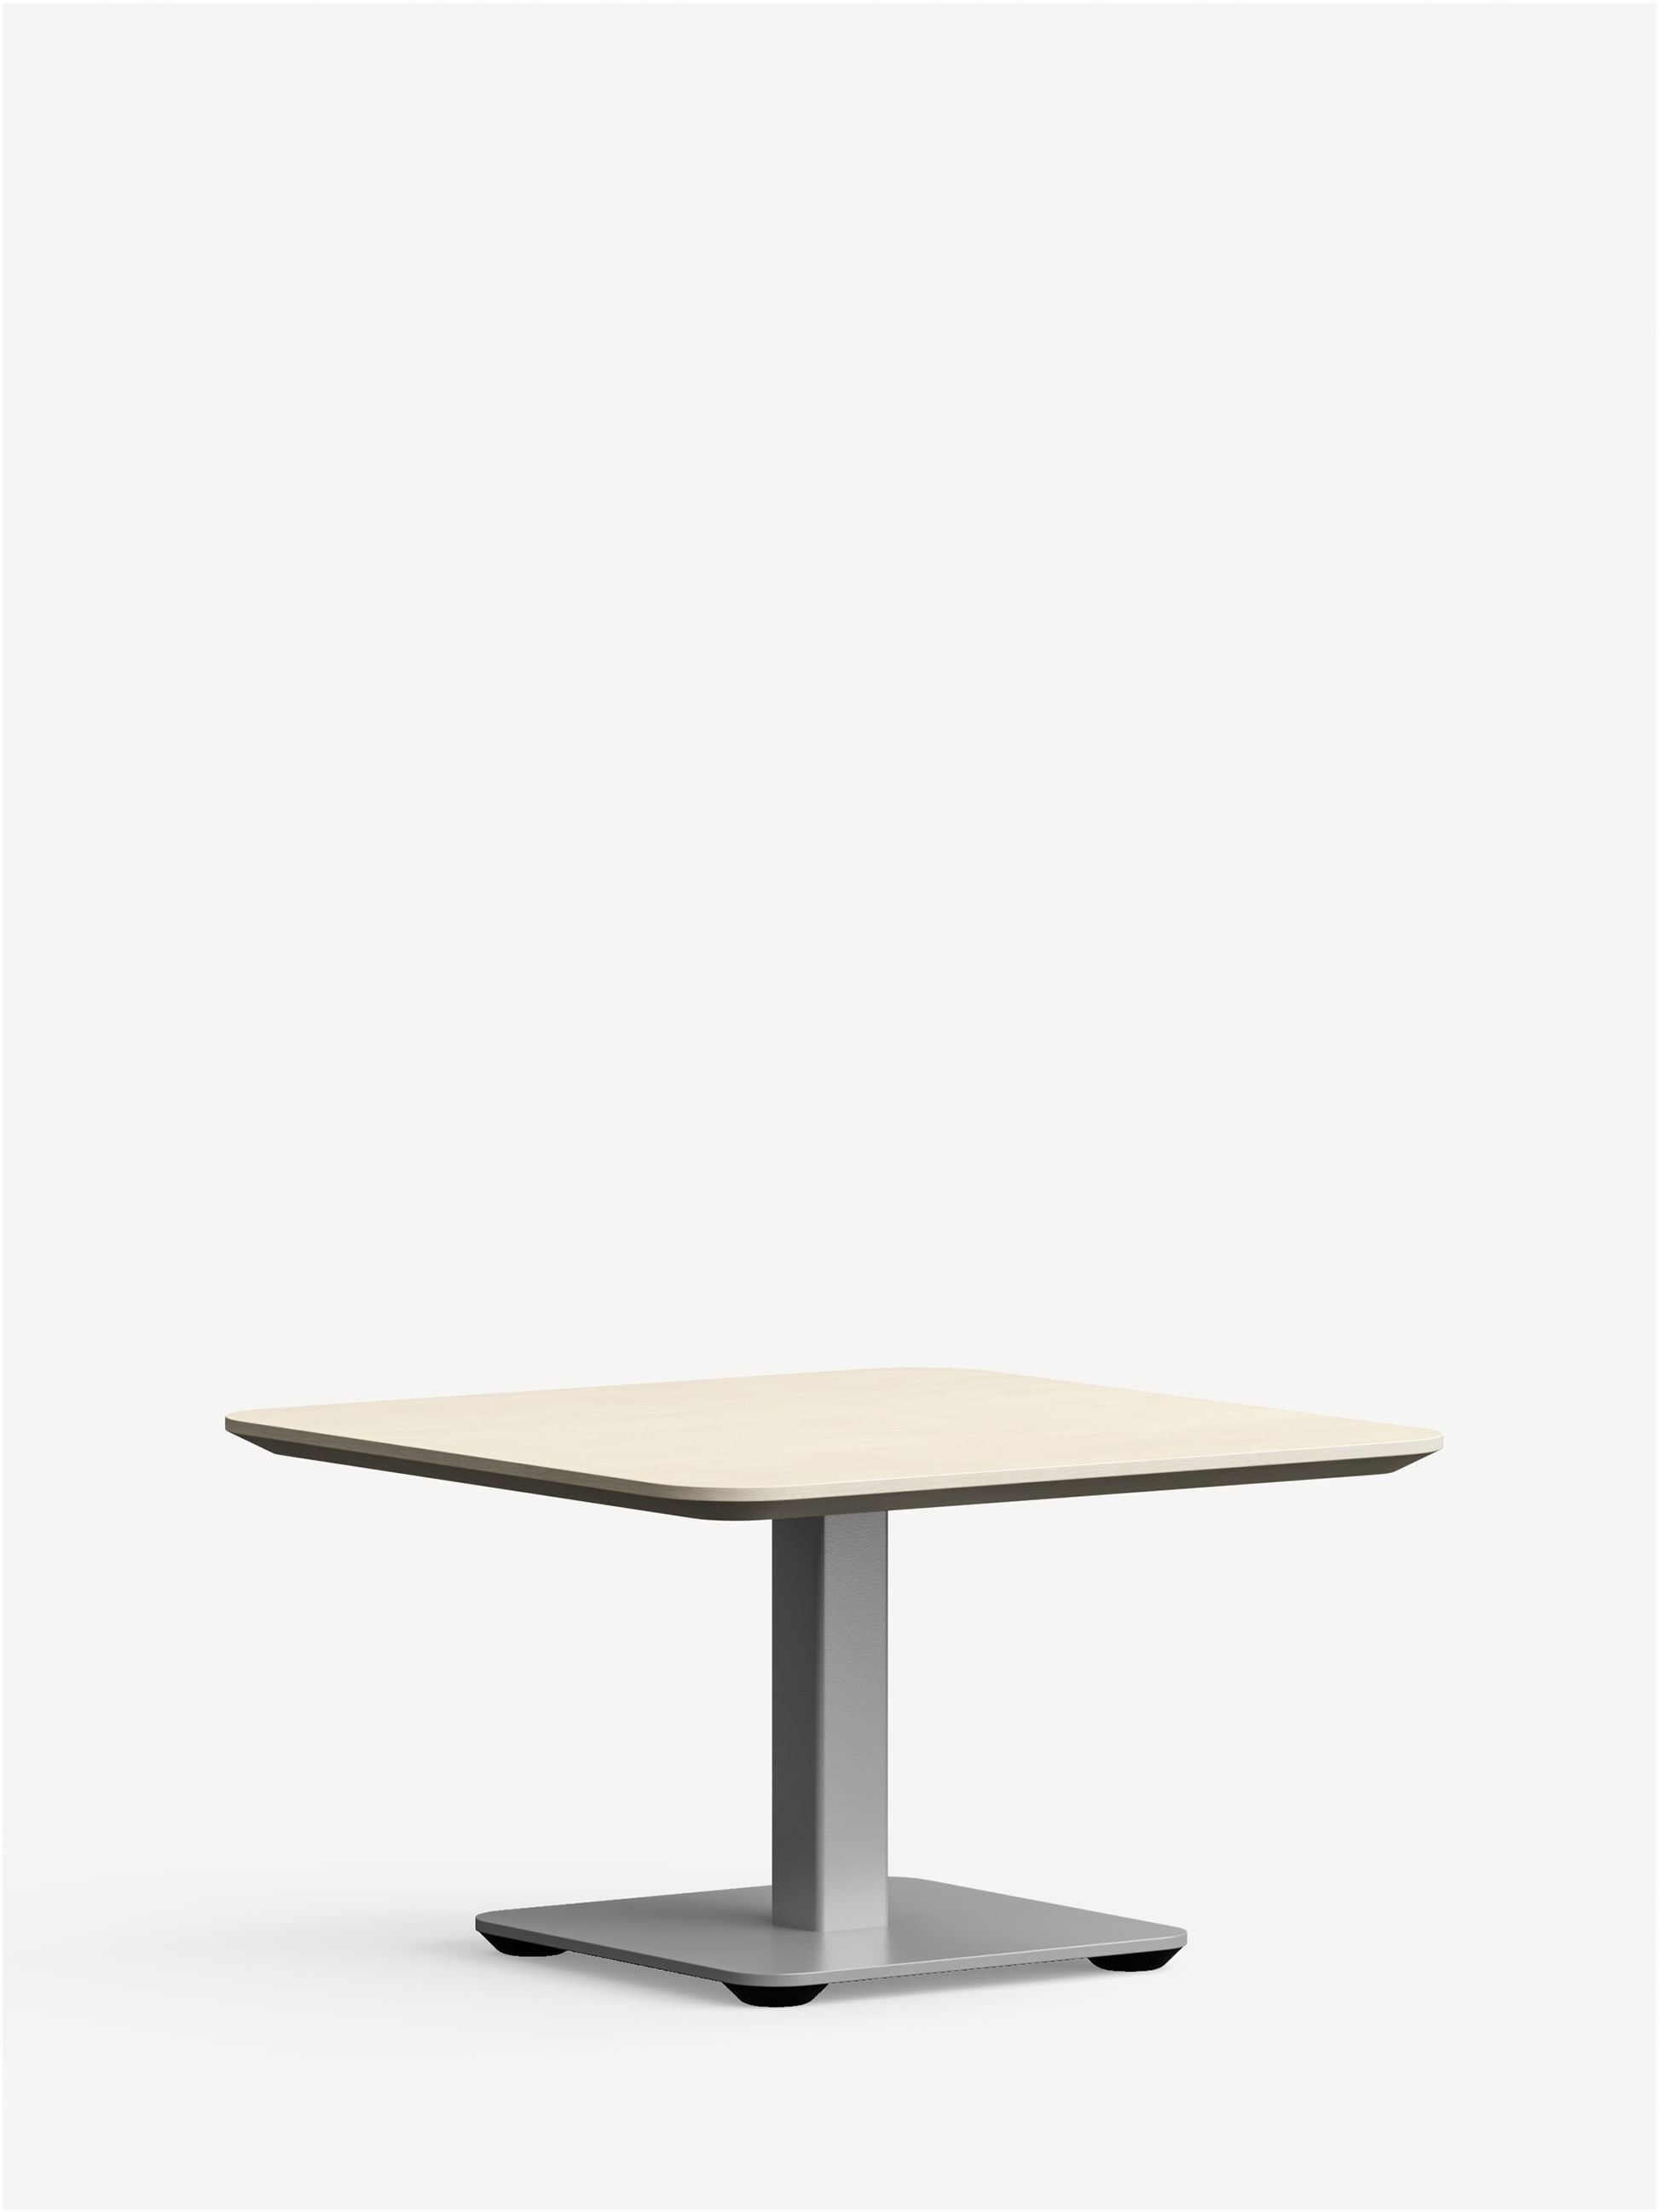 Allsteel Recharge occasional table with silver square pedestal base and square top.